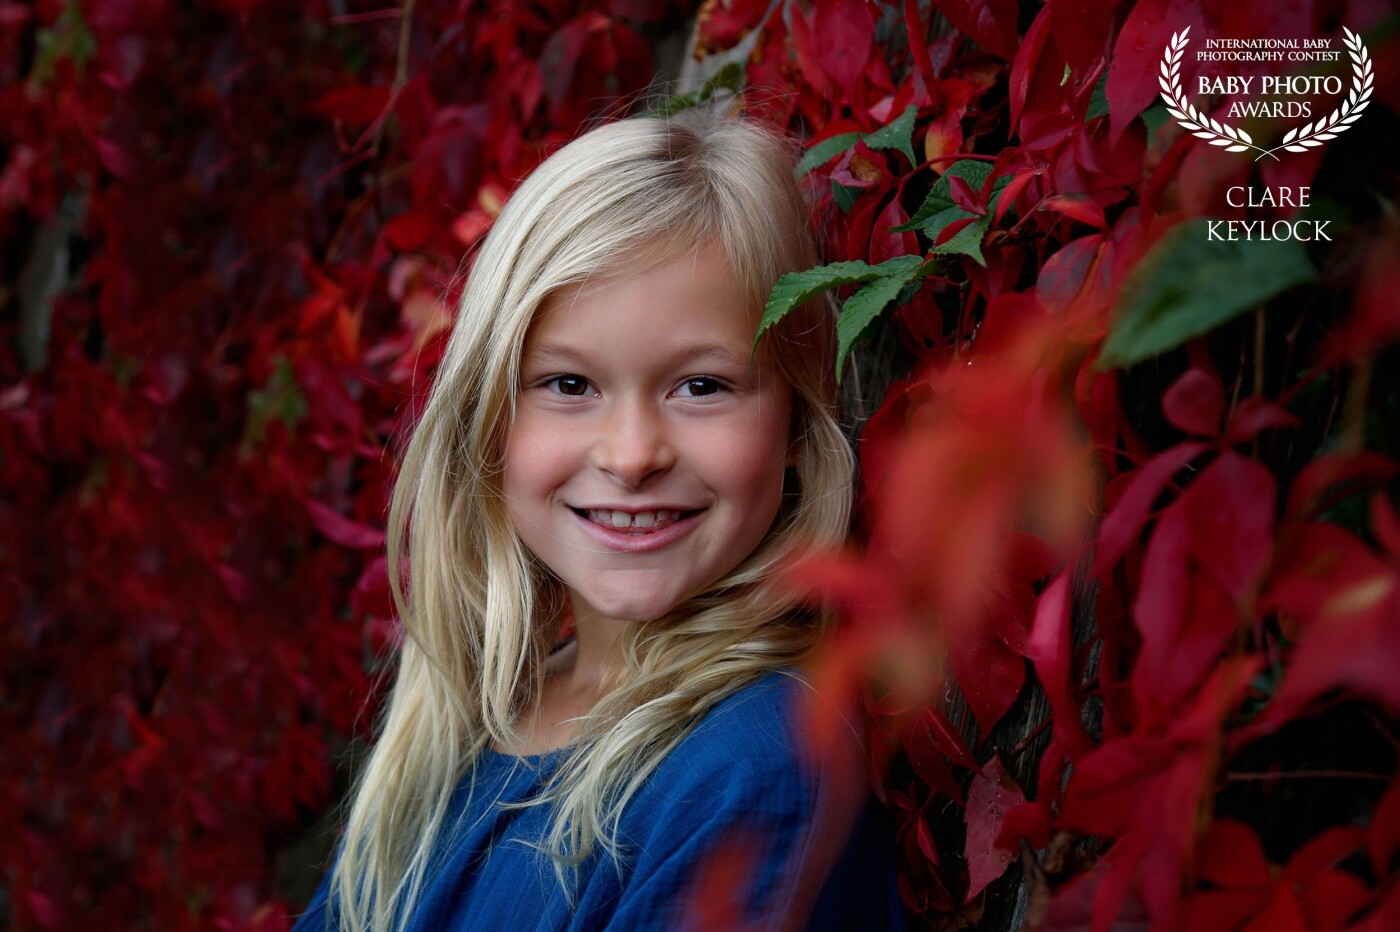 The Autumn colours were spectacular this year, nature is so amazing as is my sweet daughter in the photograph. I walked pass this wall of beautiful red foliage several times and knew I had to photograph it.